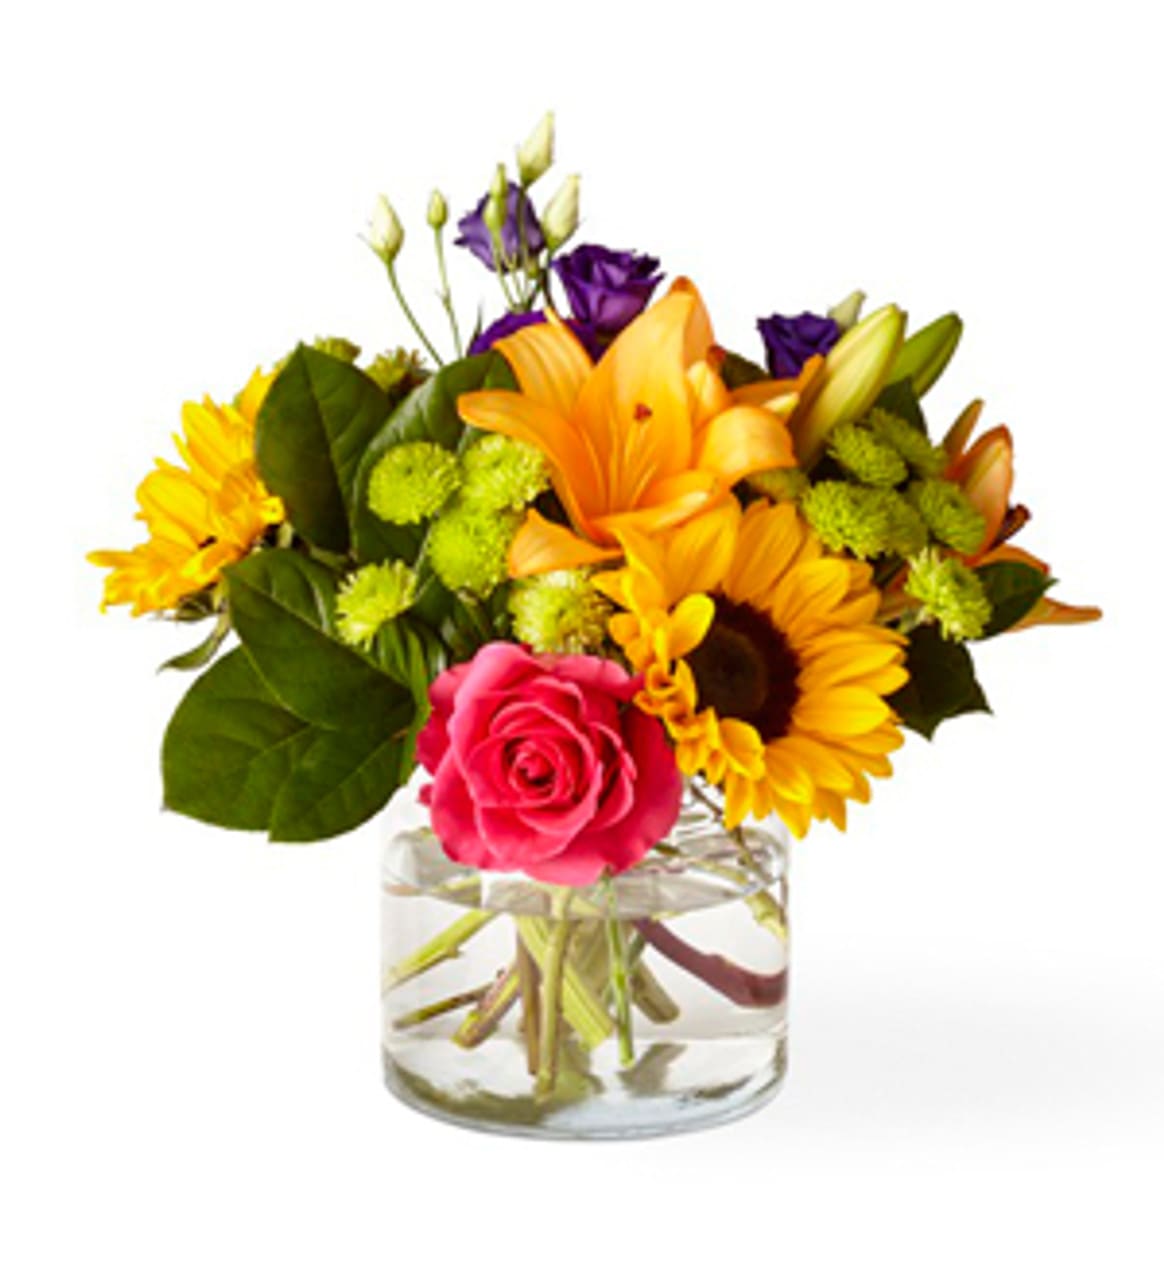 BEST DAY BOUQUET - Make this day their best day. Our local florist handcraft a colorful array of flowers in a clear glass vase to create a celebration in bloom. Perfect to give for a special reason or to simply share a smile.  Please Note: The bouquet pictured reflects our original design for this product. While we always try to follow the color palette, we may replace stems to deliver the freshest bouquet possible, and we may sometimes need to use a different vase.